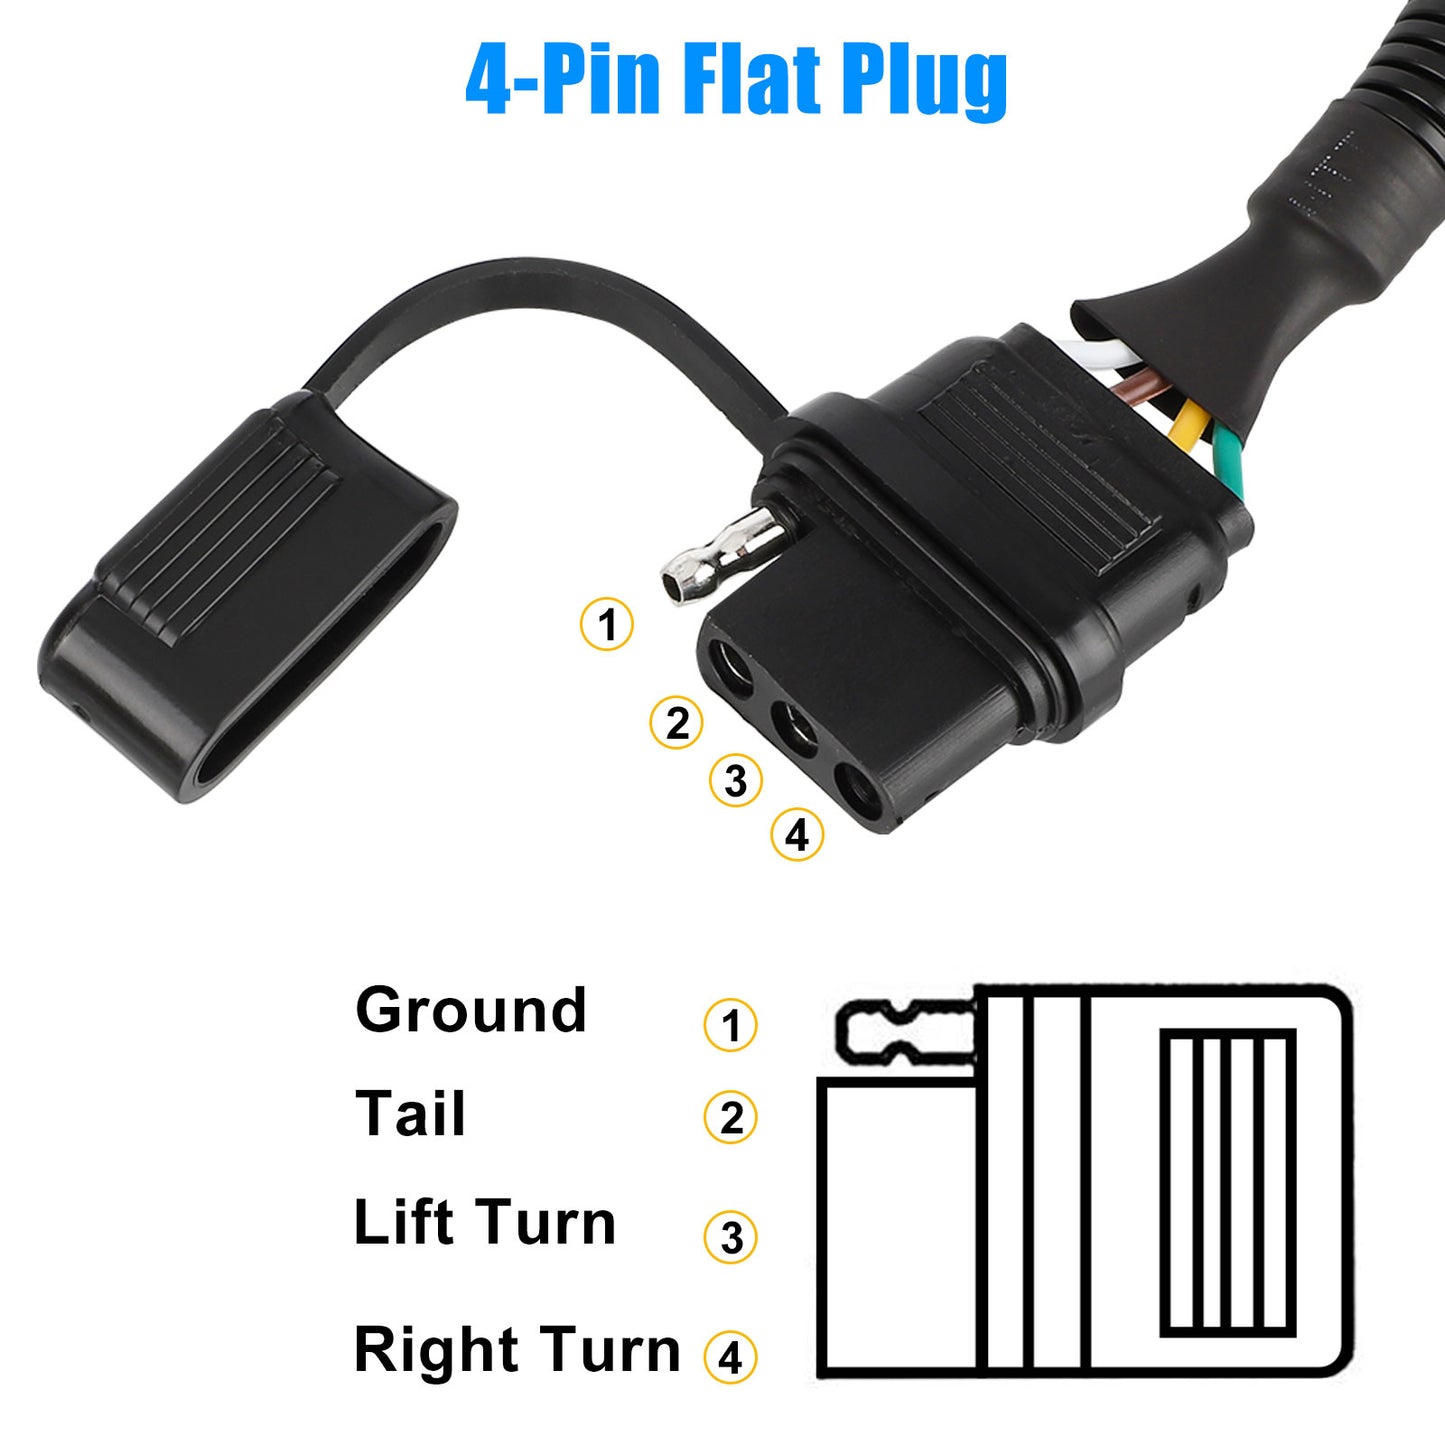 Trailer Adapter - 7-Pin to 4-Pin, Seamless Integration, Robust Construction